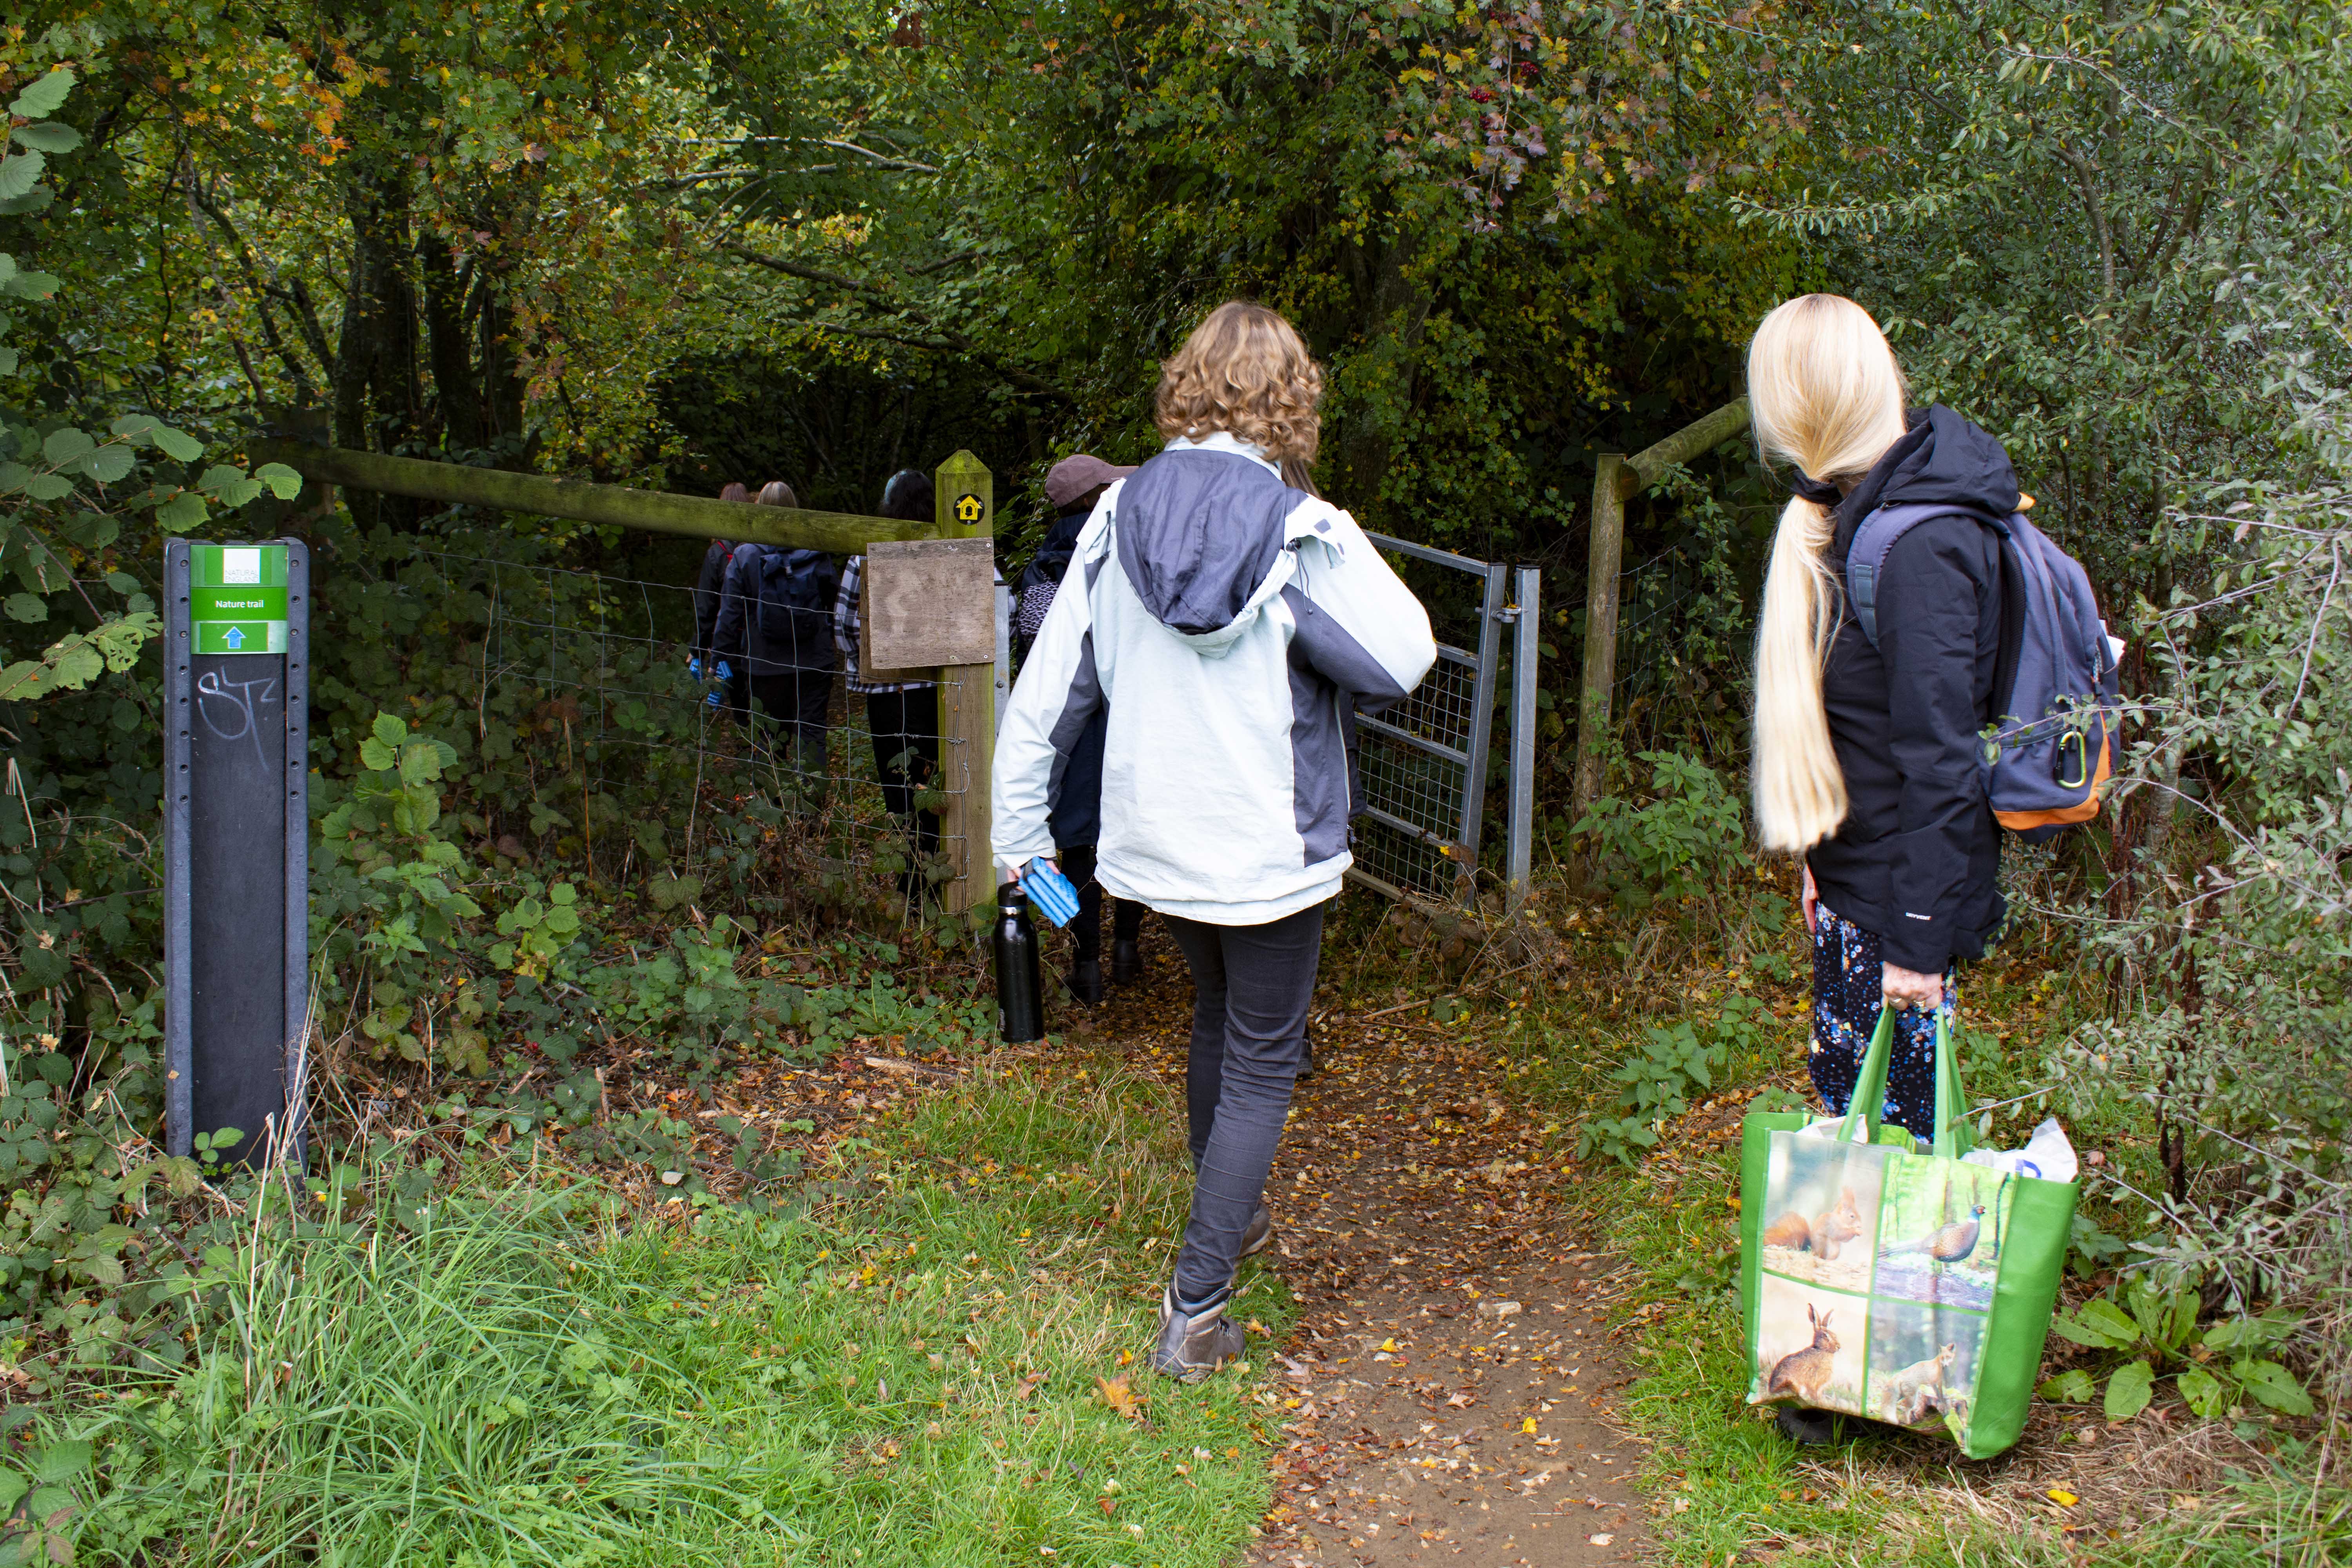 People walking into the entrance of the woods at Wye Nature Reserve.